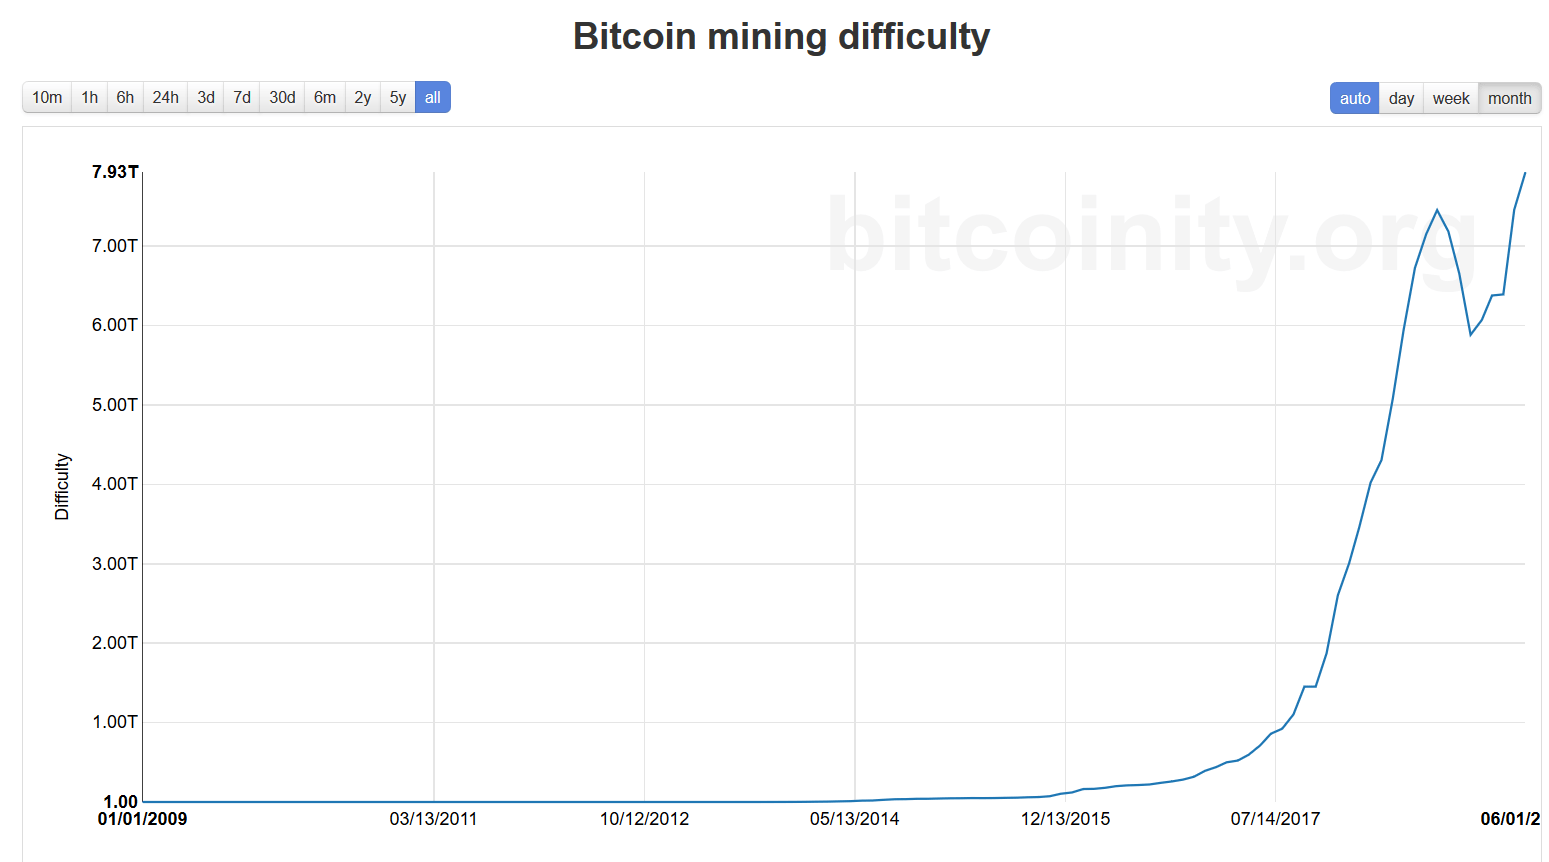 All-time chart of Bitcoin mining difficulty